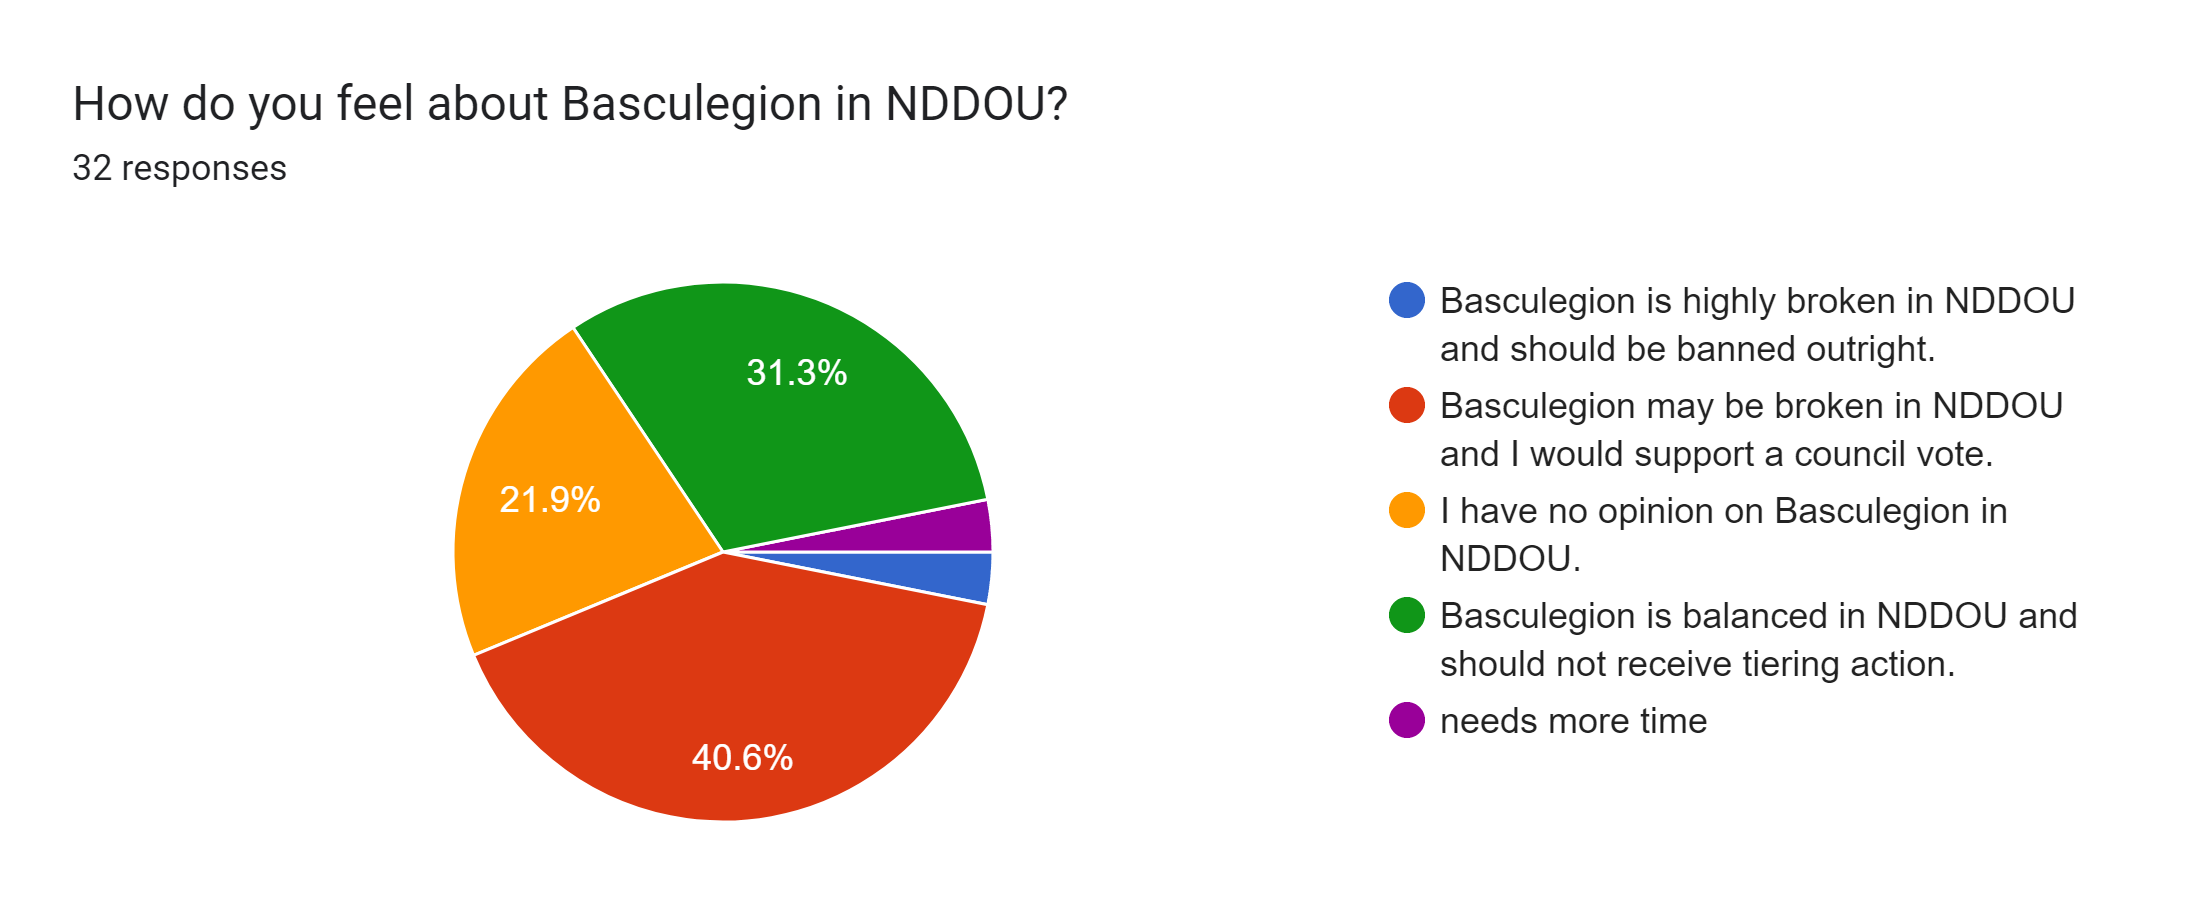 Forms response chart. Question title: How do you feel about Basculegion in NDDOU?. Number of responses: 32 responses.